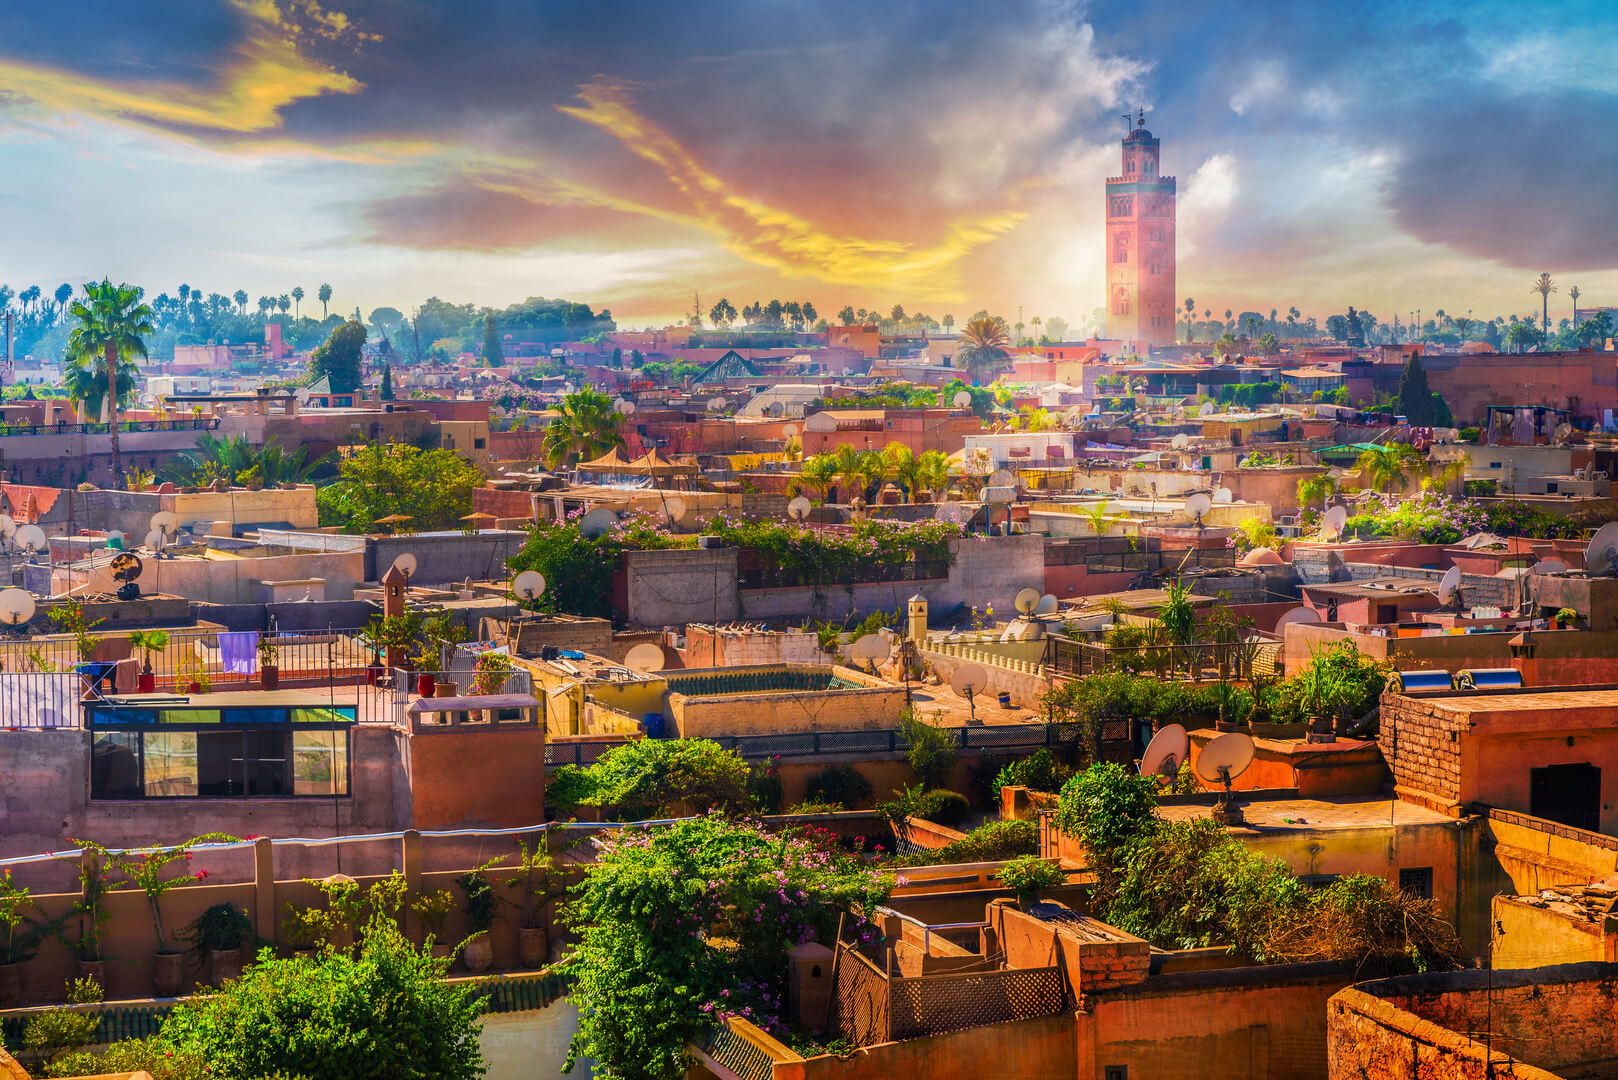 Panoramic view of the medina of marrakech, Morocco